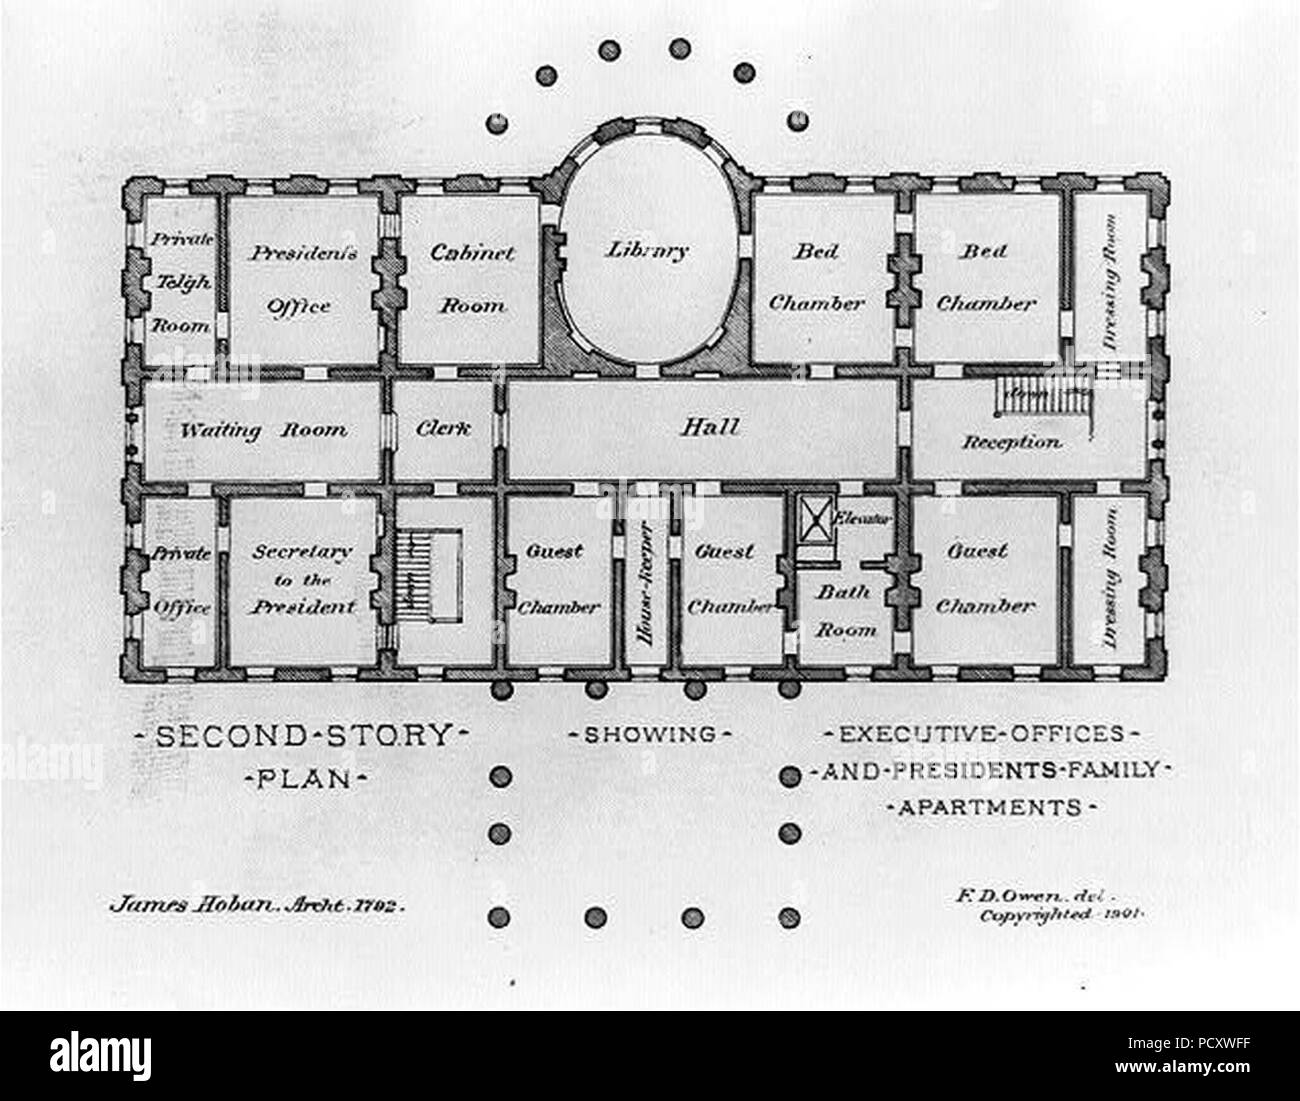 Alterations to the Executive Mansion for Mrs. Benjamin Harrison Pennsylvania Avenue N.W. Washington D.C. Second story plan James Hoban's plan) - Fred D. Owen del Stock Photo